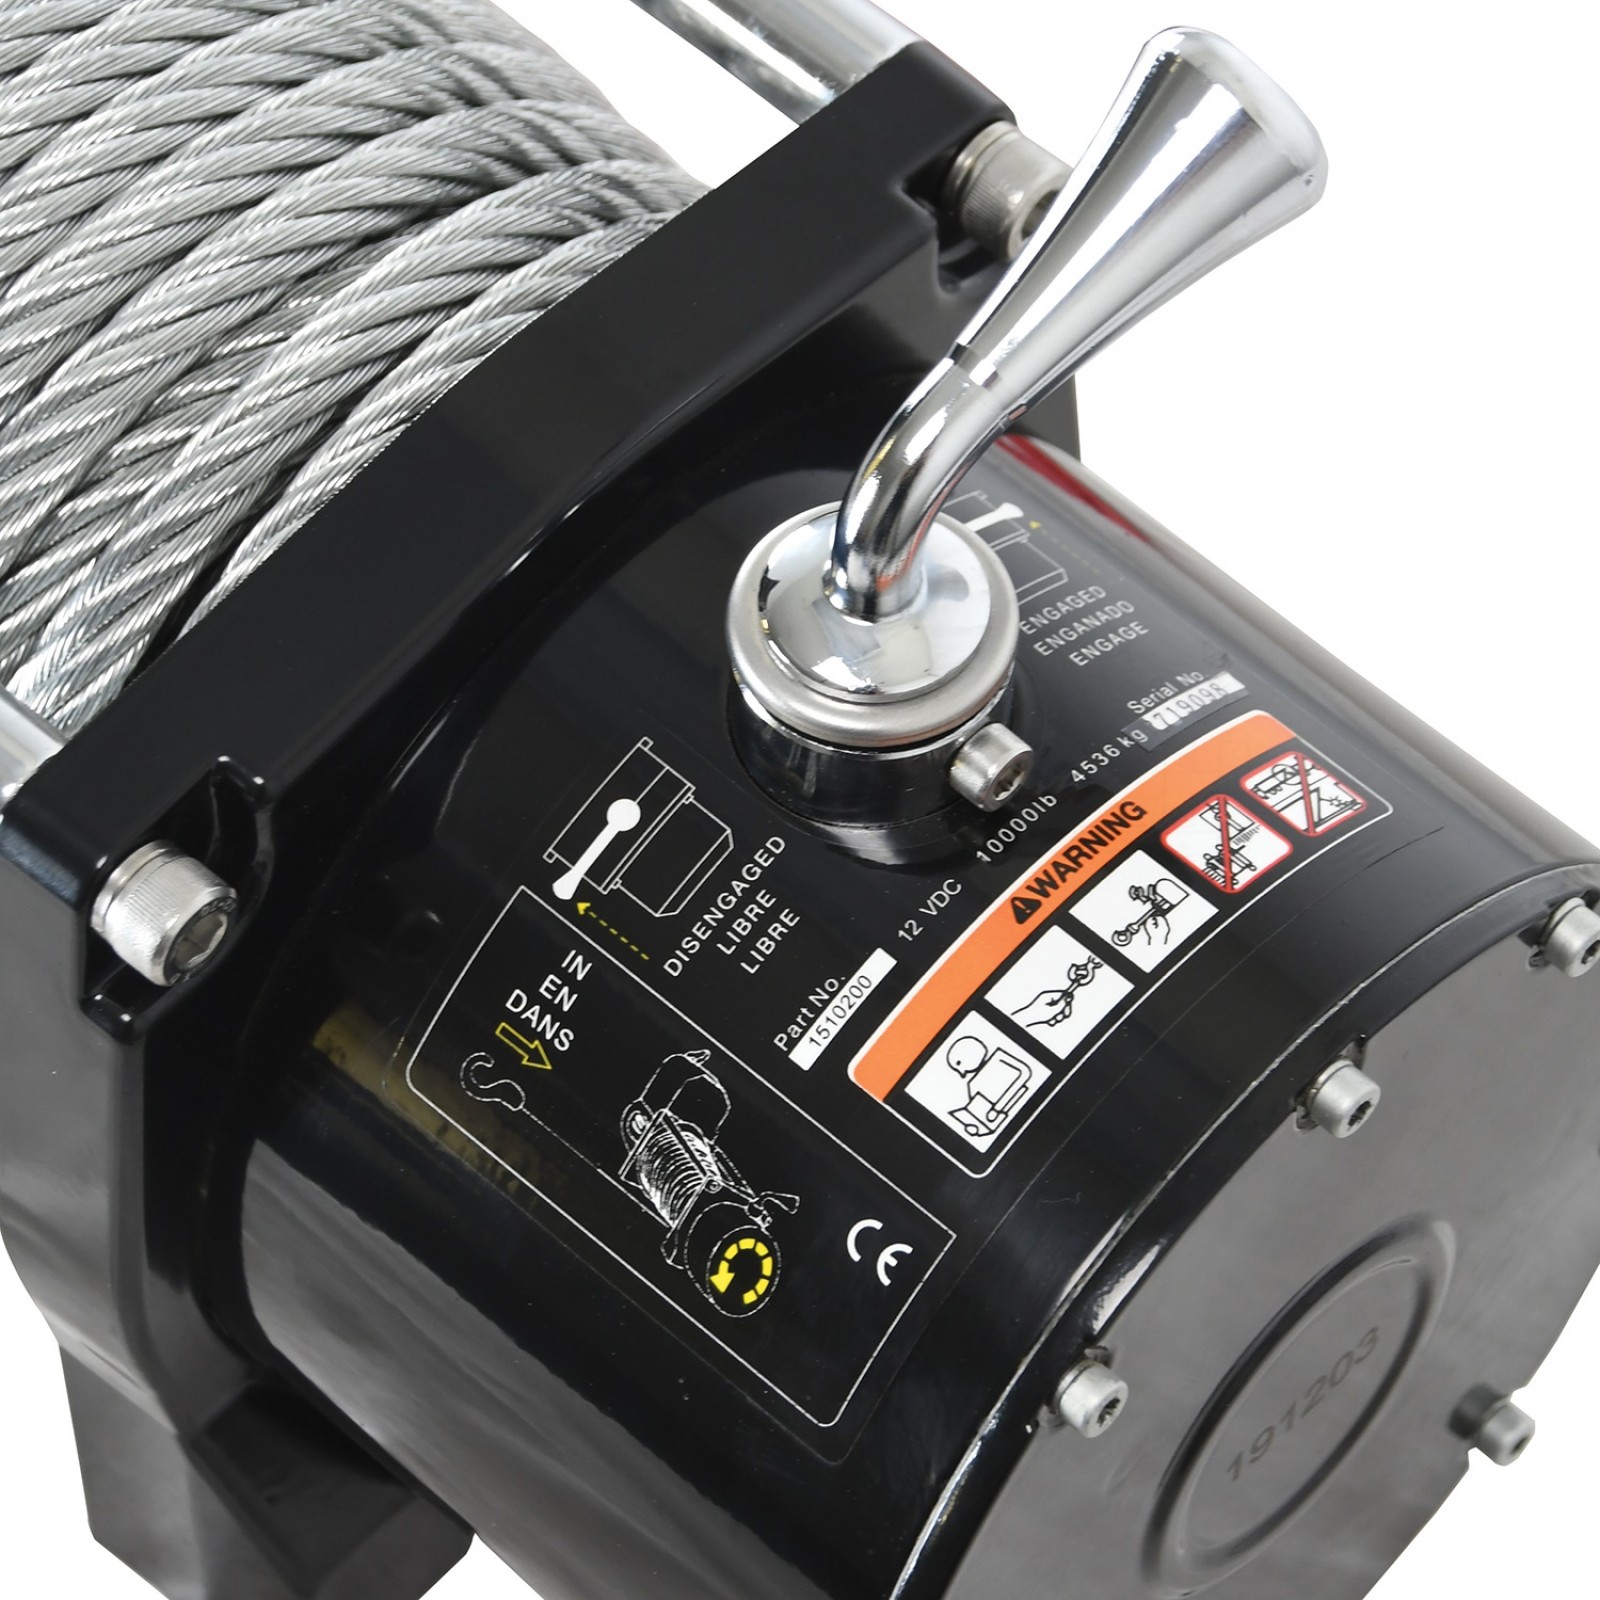 Superwinch 1510200 LP10000 Winch 10,000lbs/4536kg single line pull with roller fairlead and 12 handheld remote 